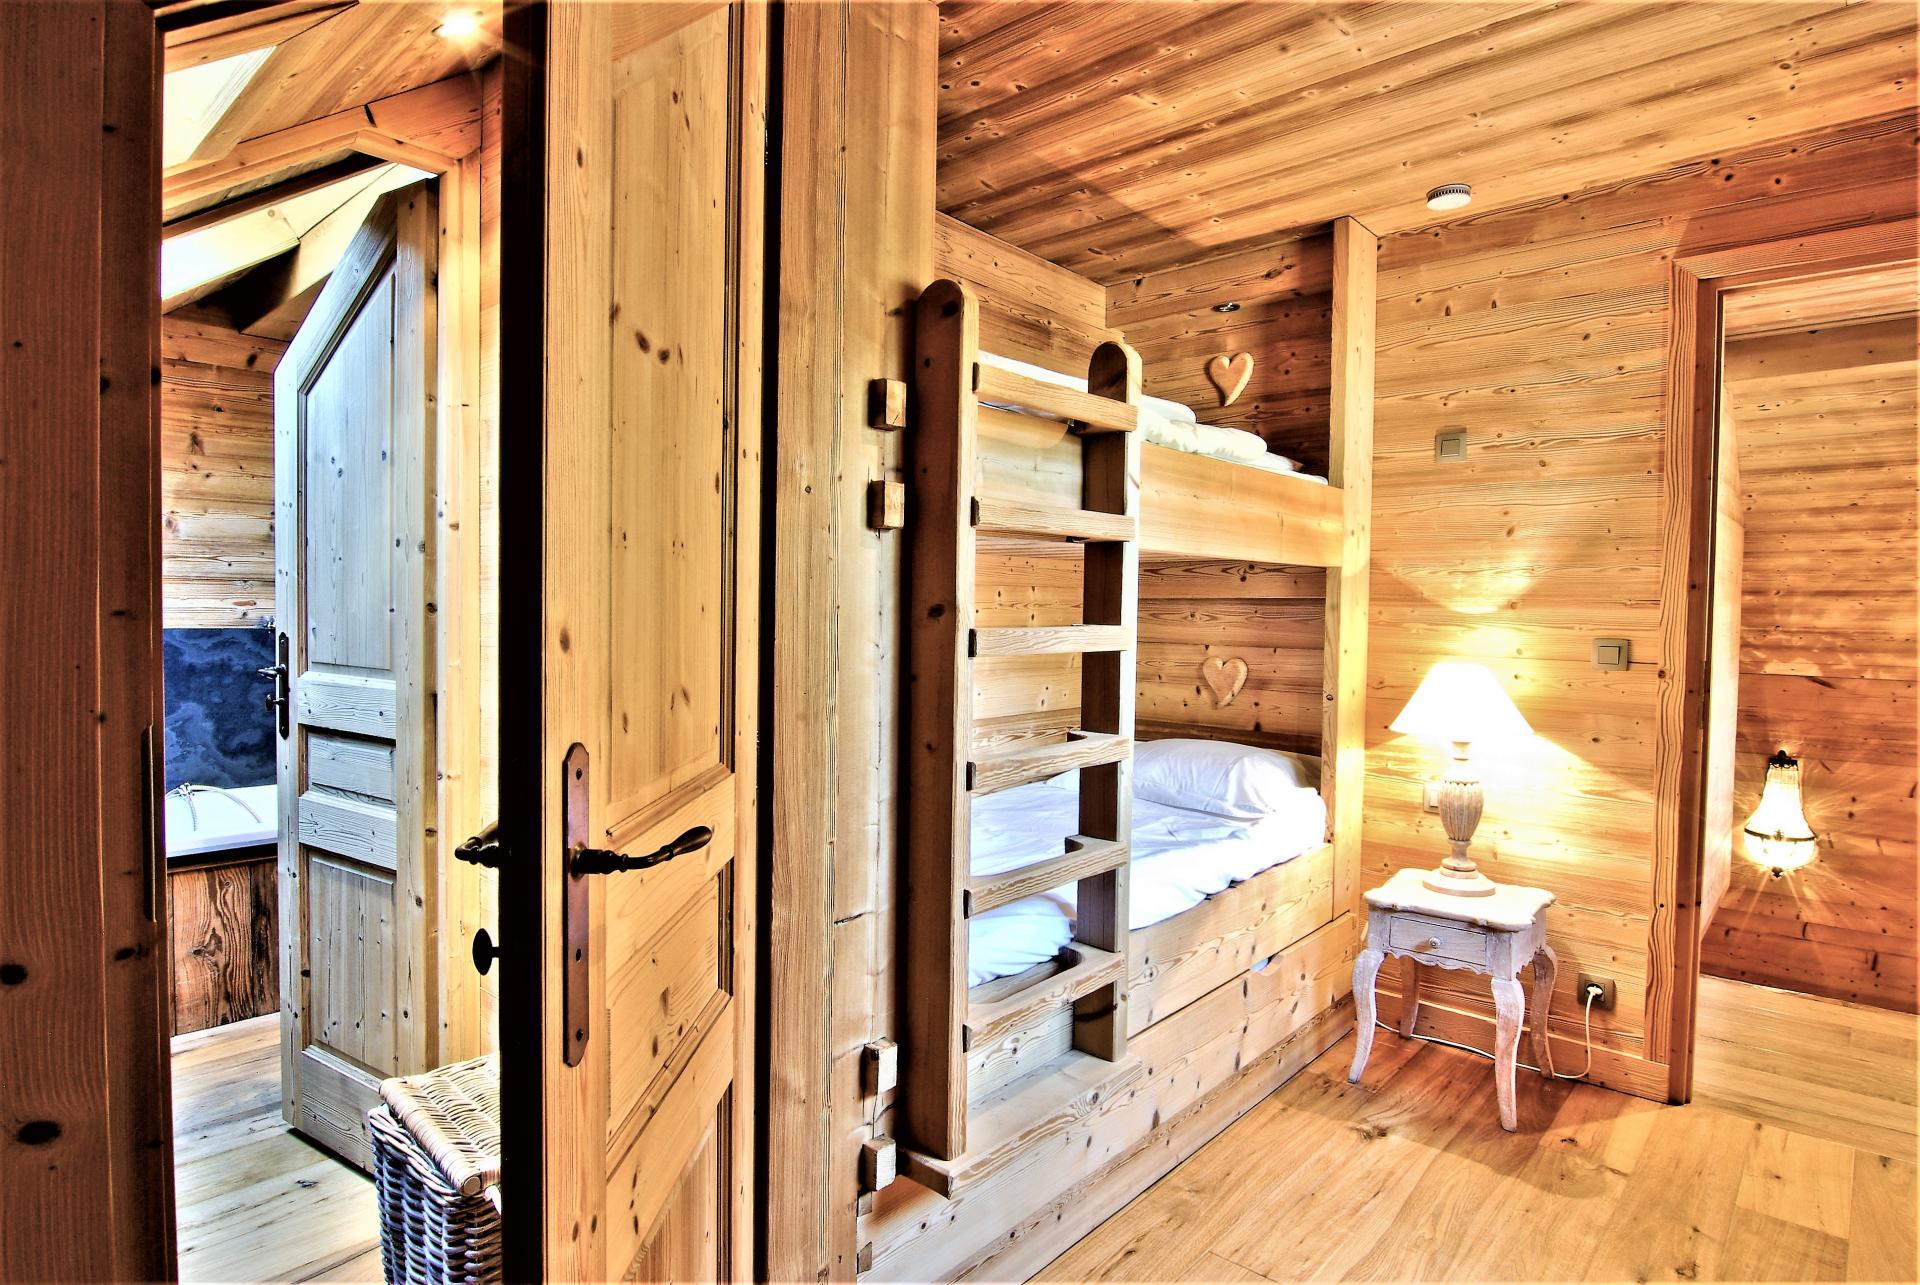 BUNK BEDS FOR CHILDREN WITH A SHARED BATHROOM